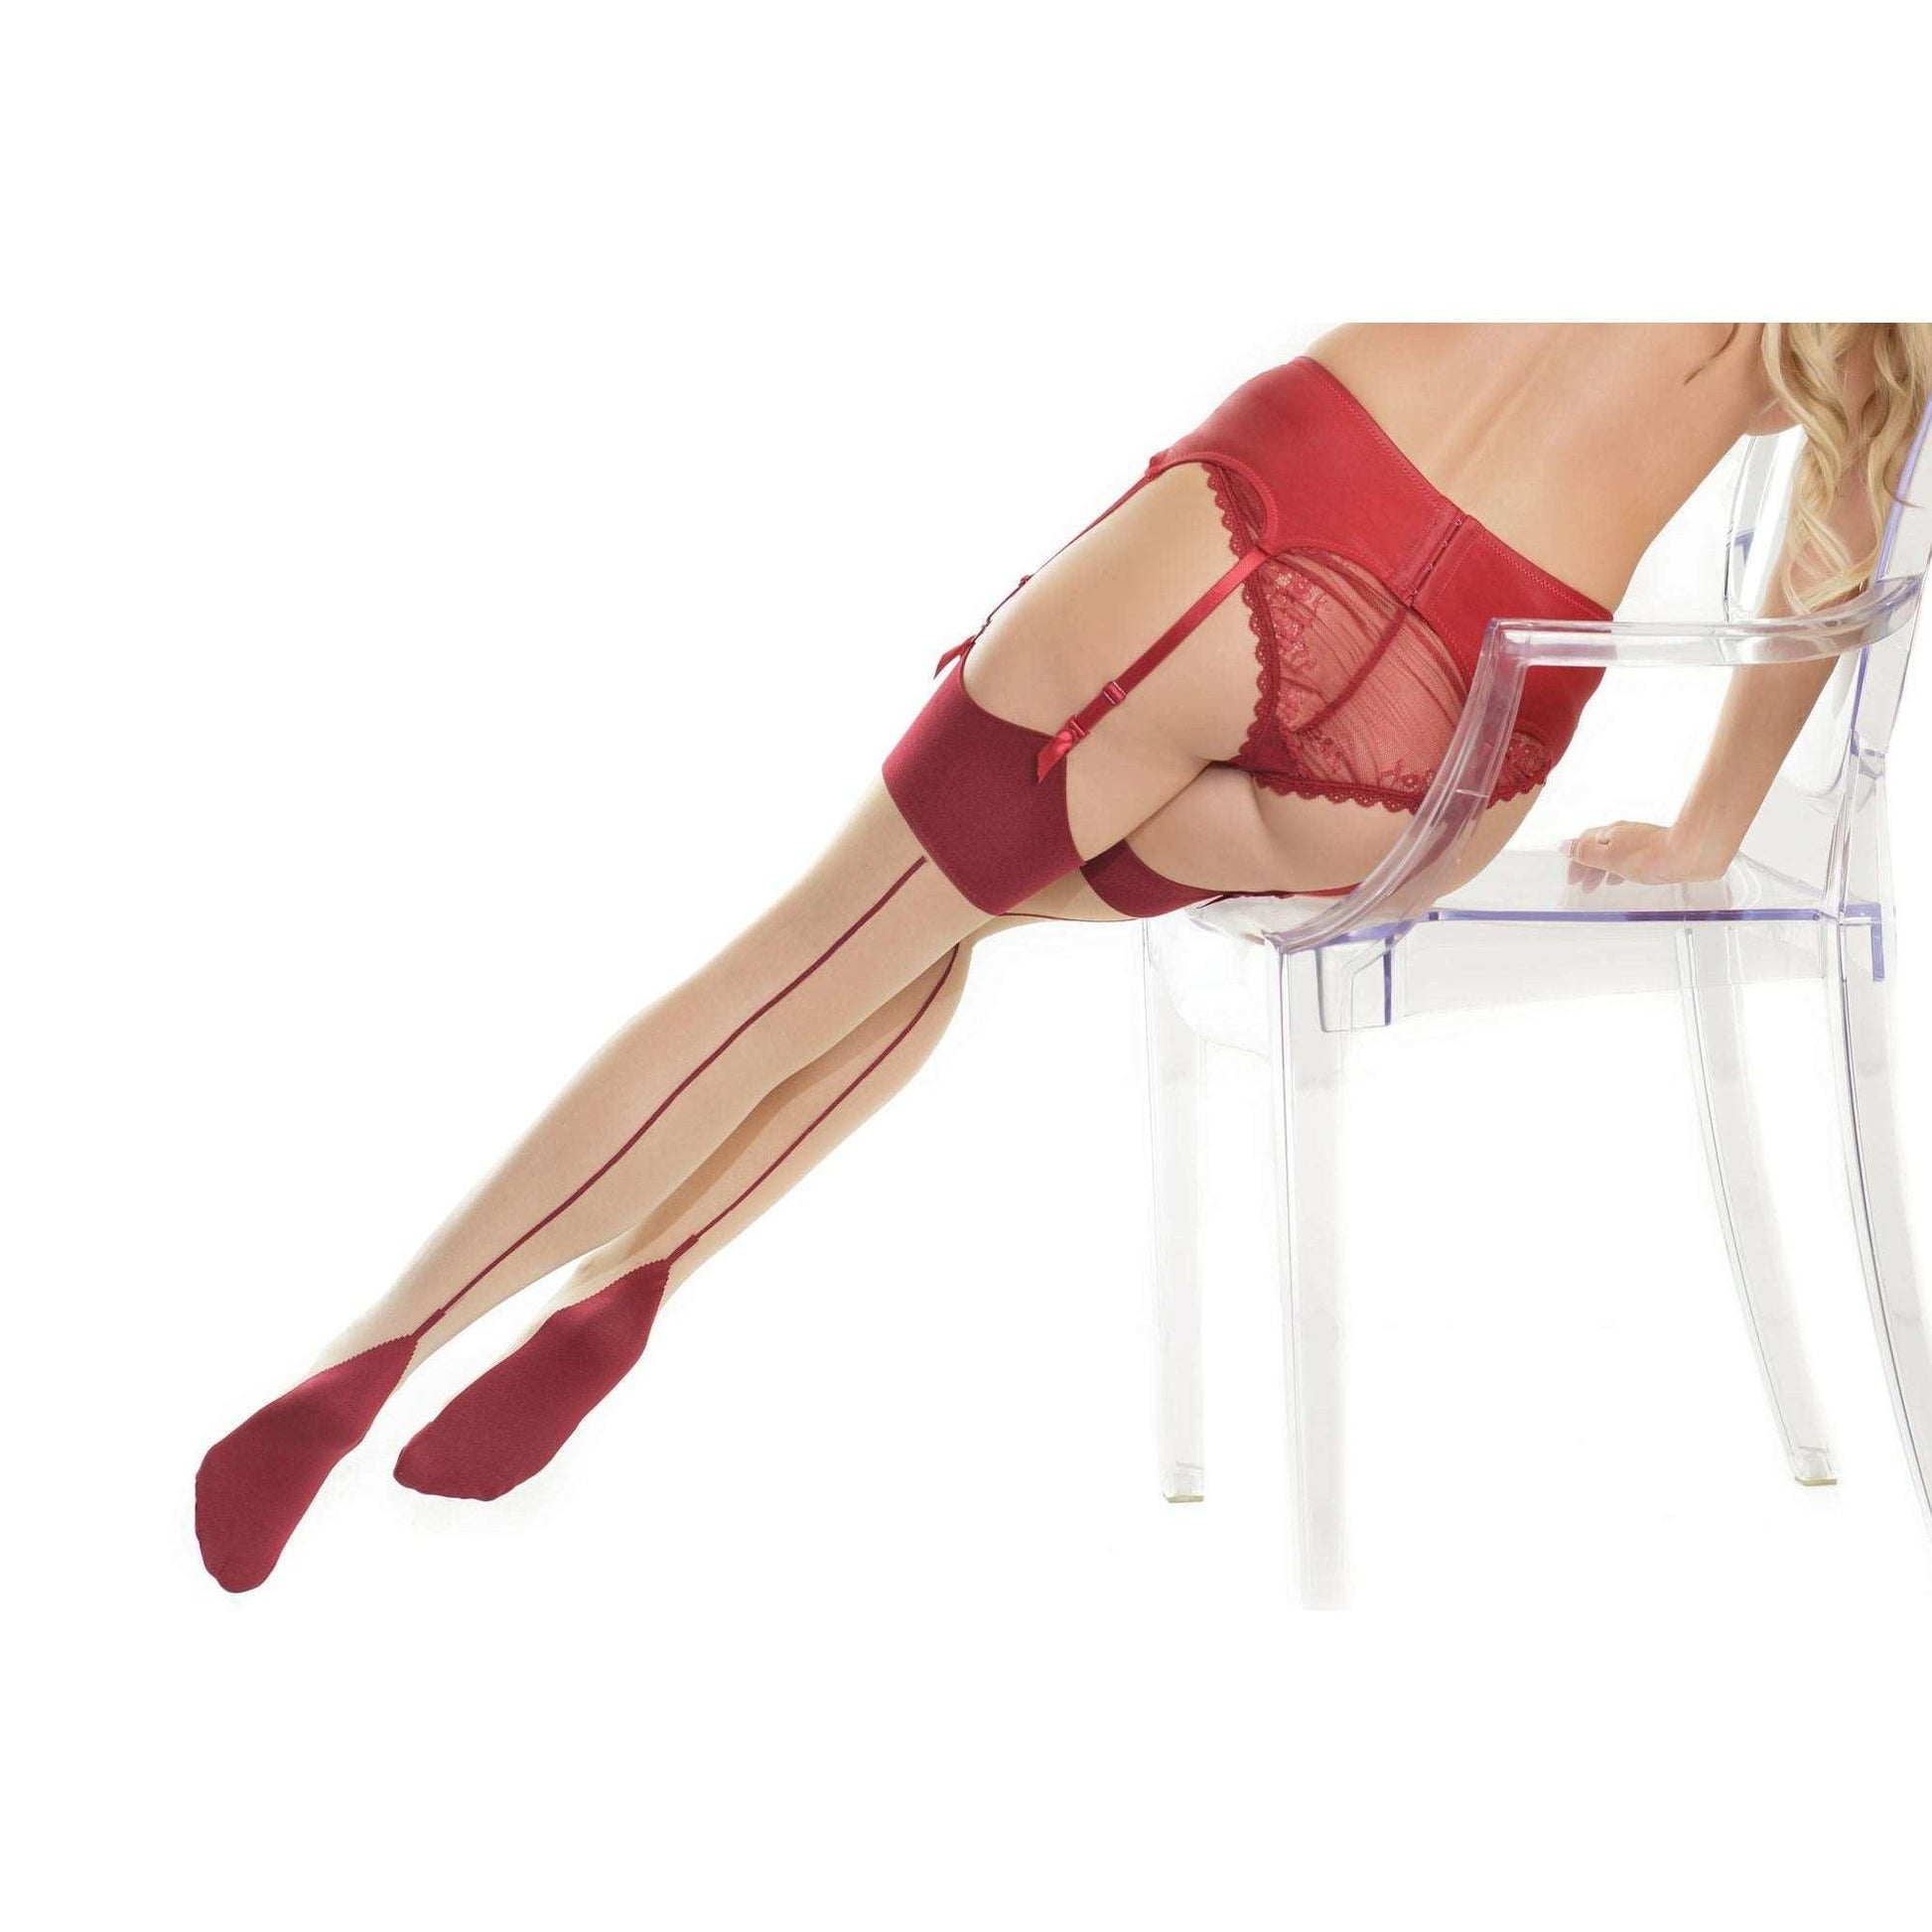 Coquette Stockings With Seam, Erotic Lingerie and Adult Store My Temptations